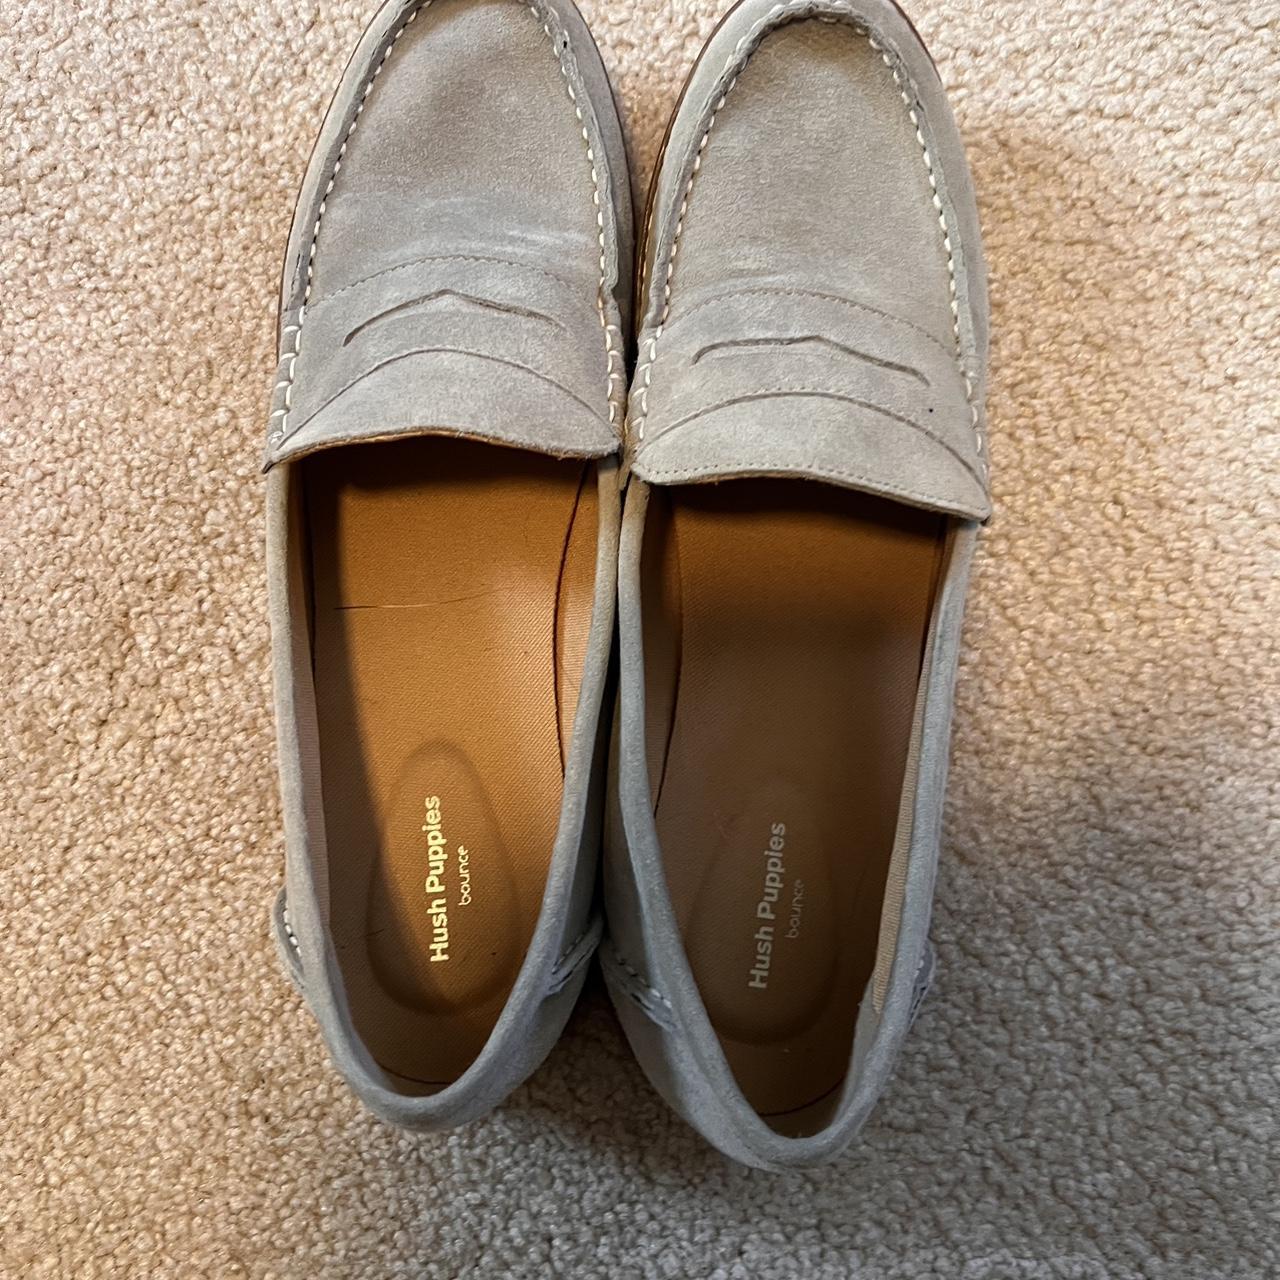 Hush Puppies penny loafers size 10 - Depop